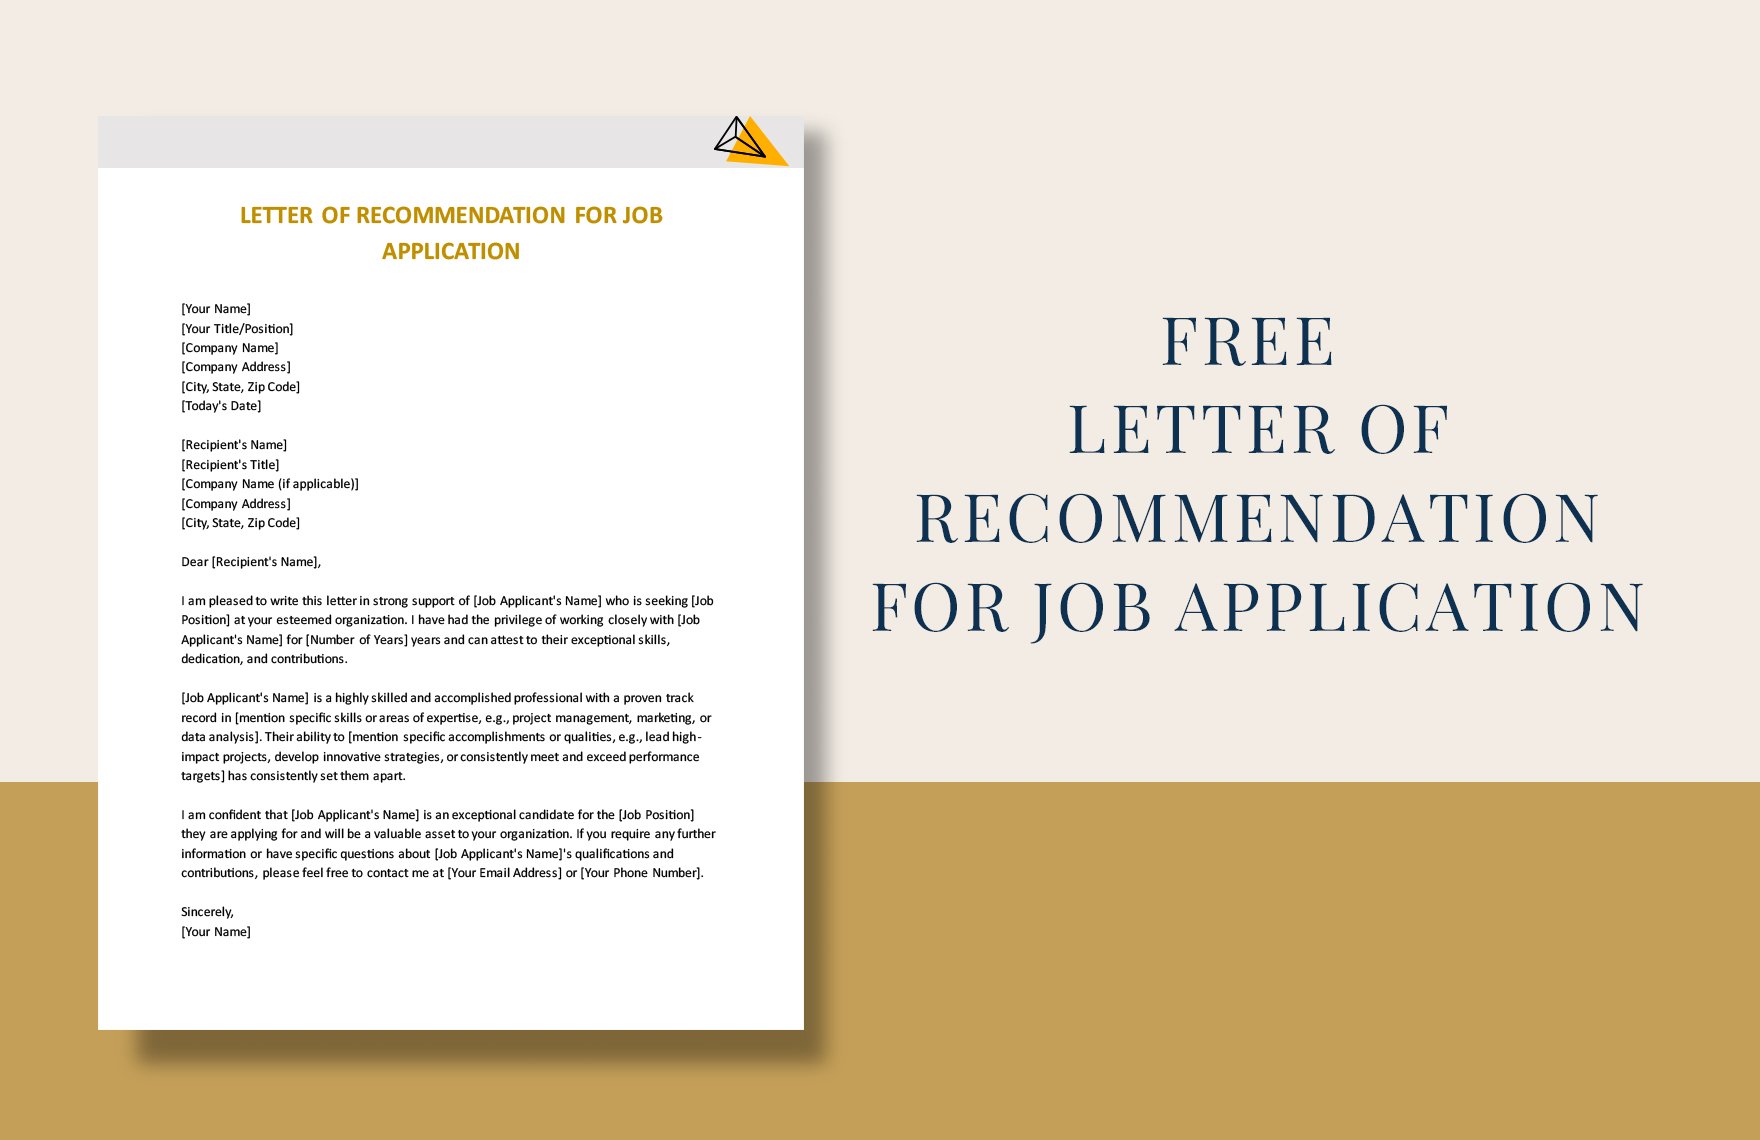 Free Letter Of Recommendation For Job Application in Word, Google Docs, PDF